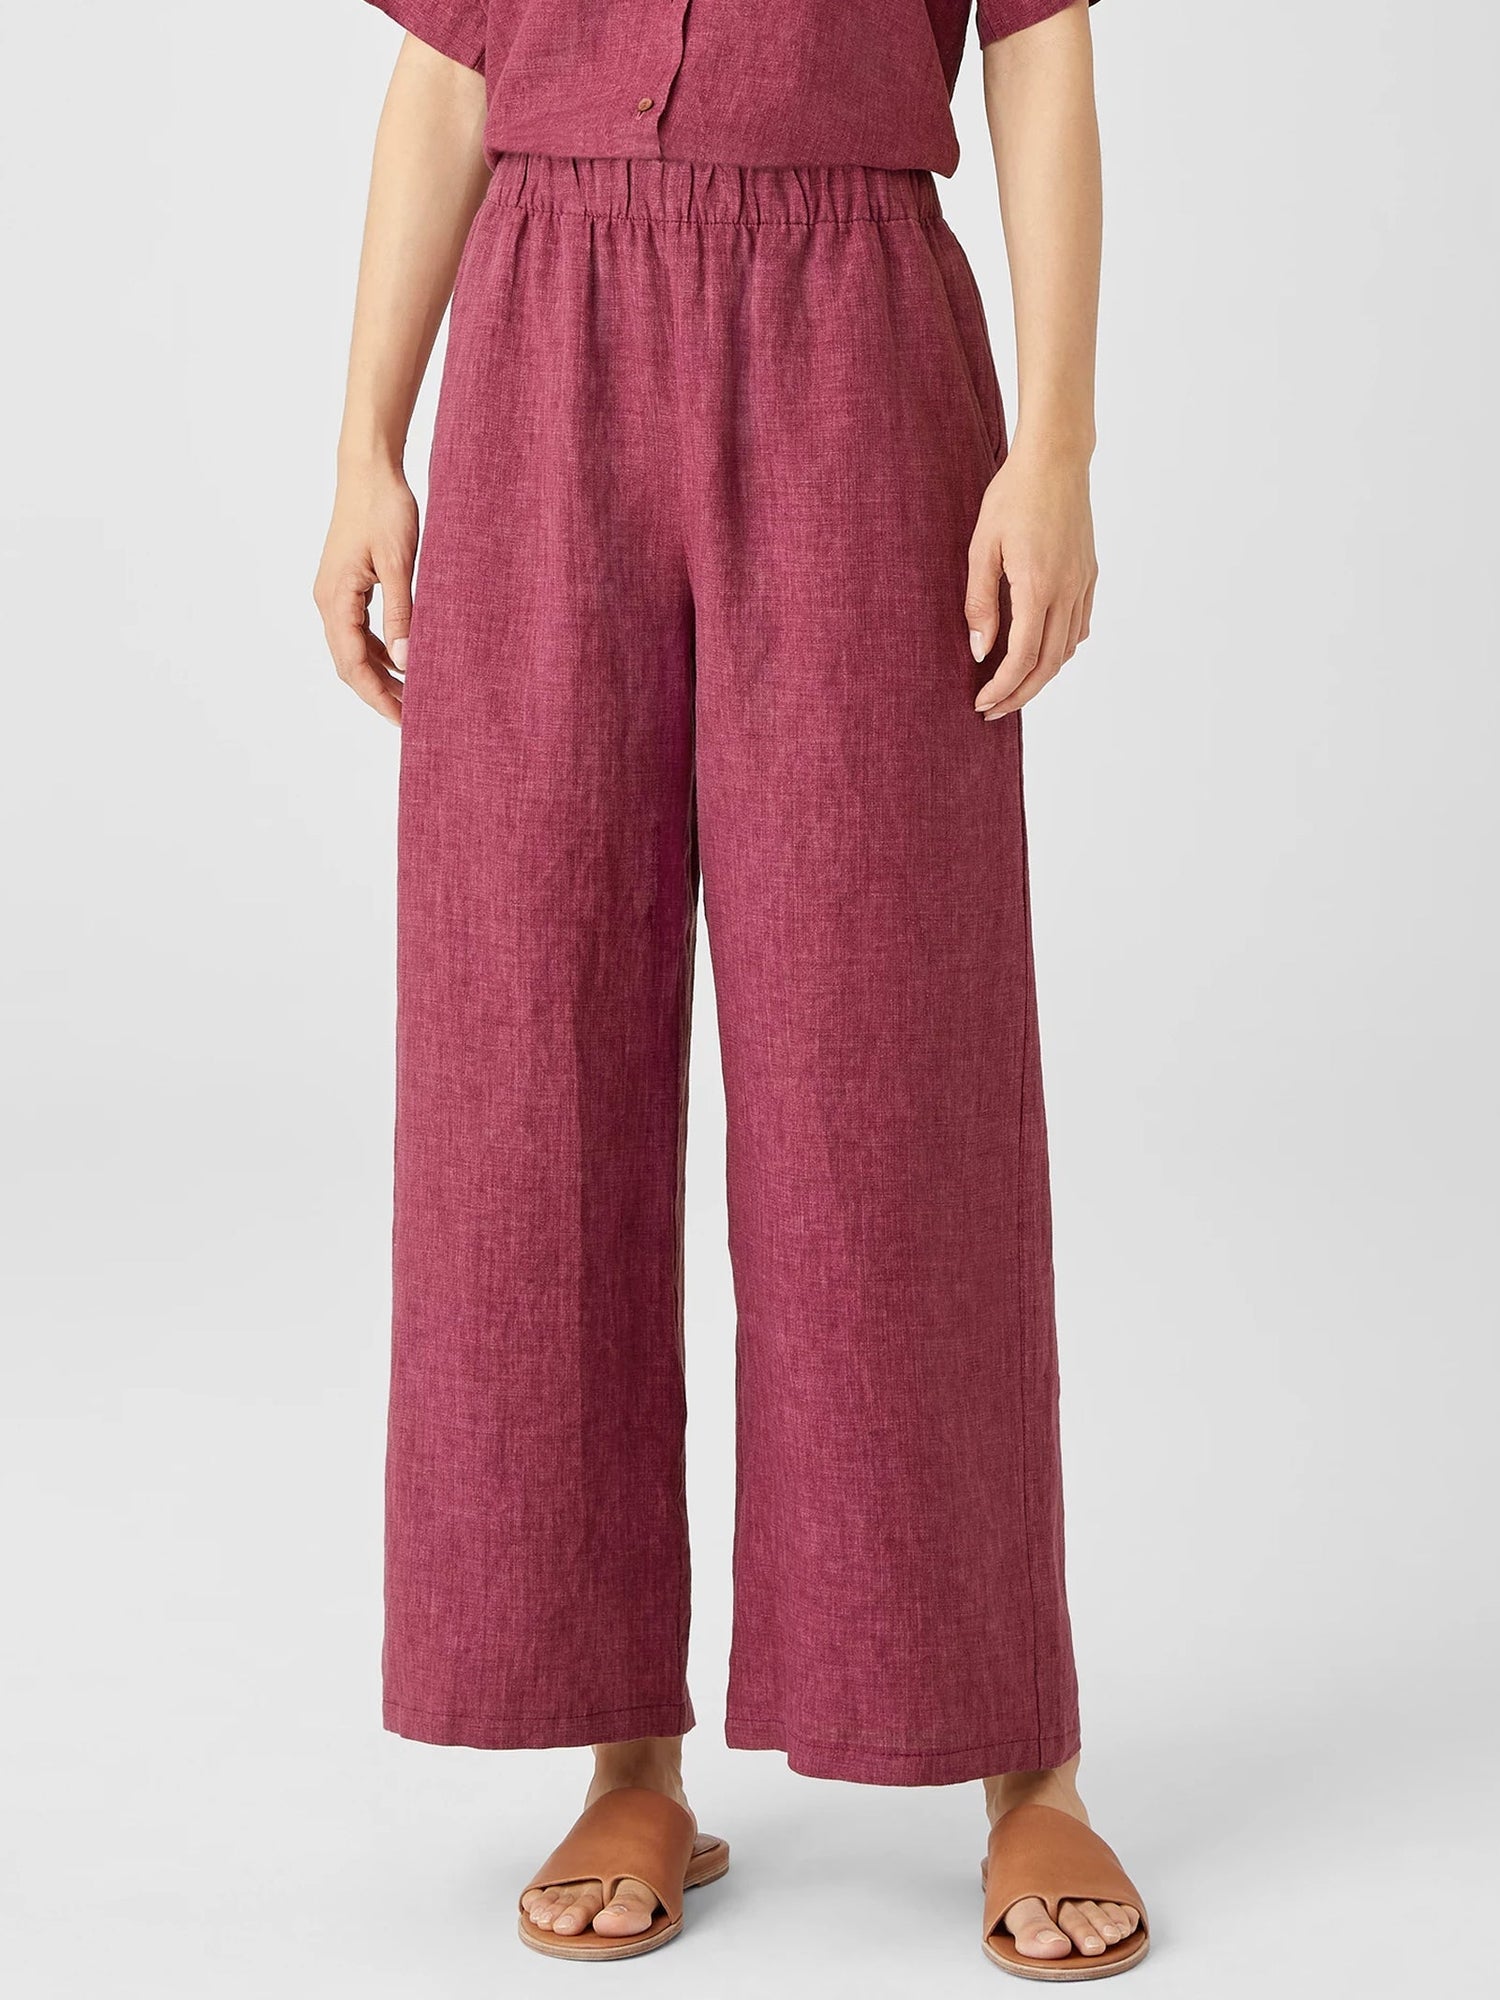 Classic Wide-Leg Casual Daytime Pant - boddysize